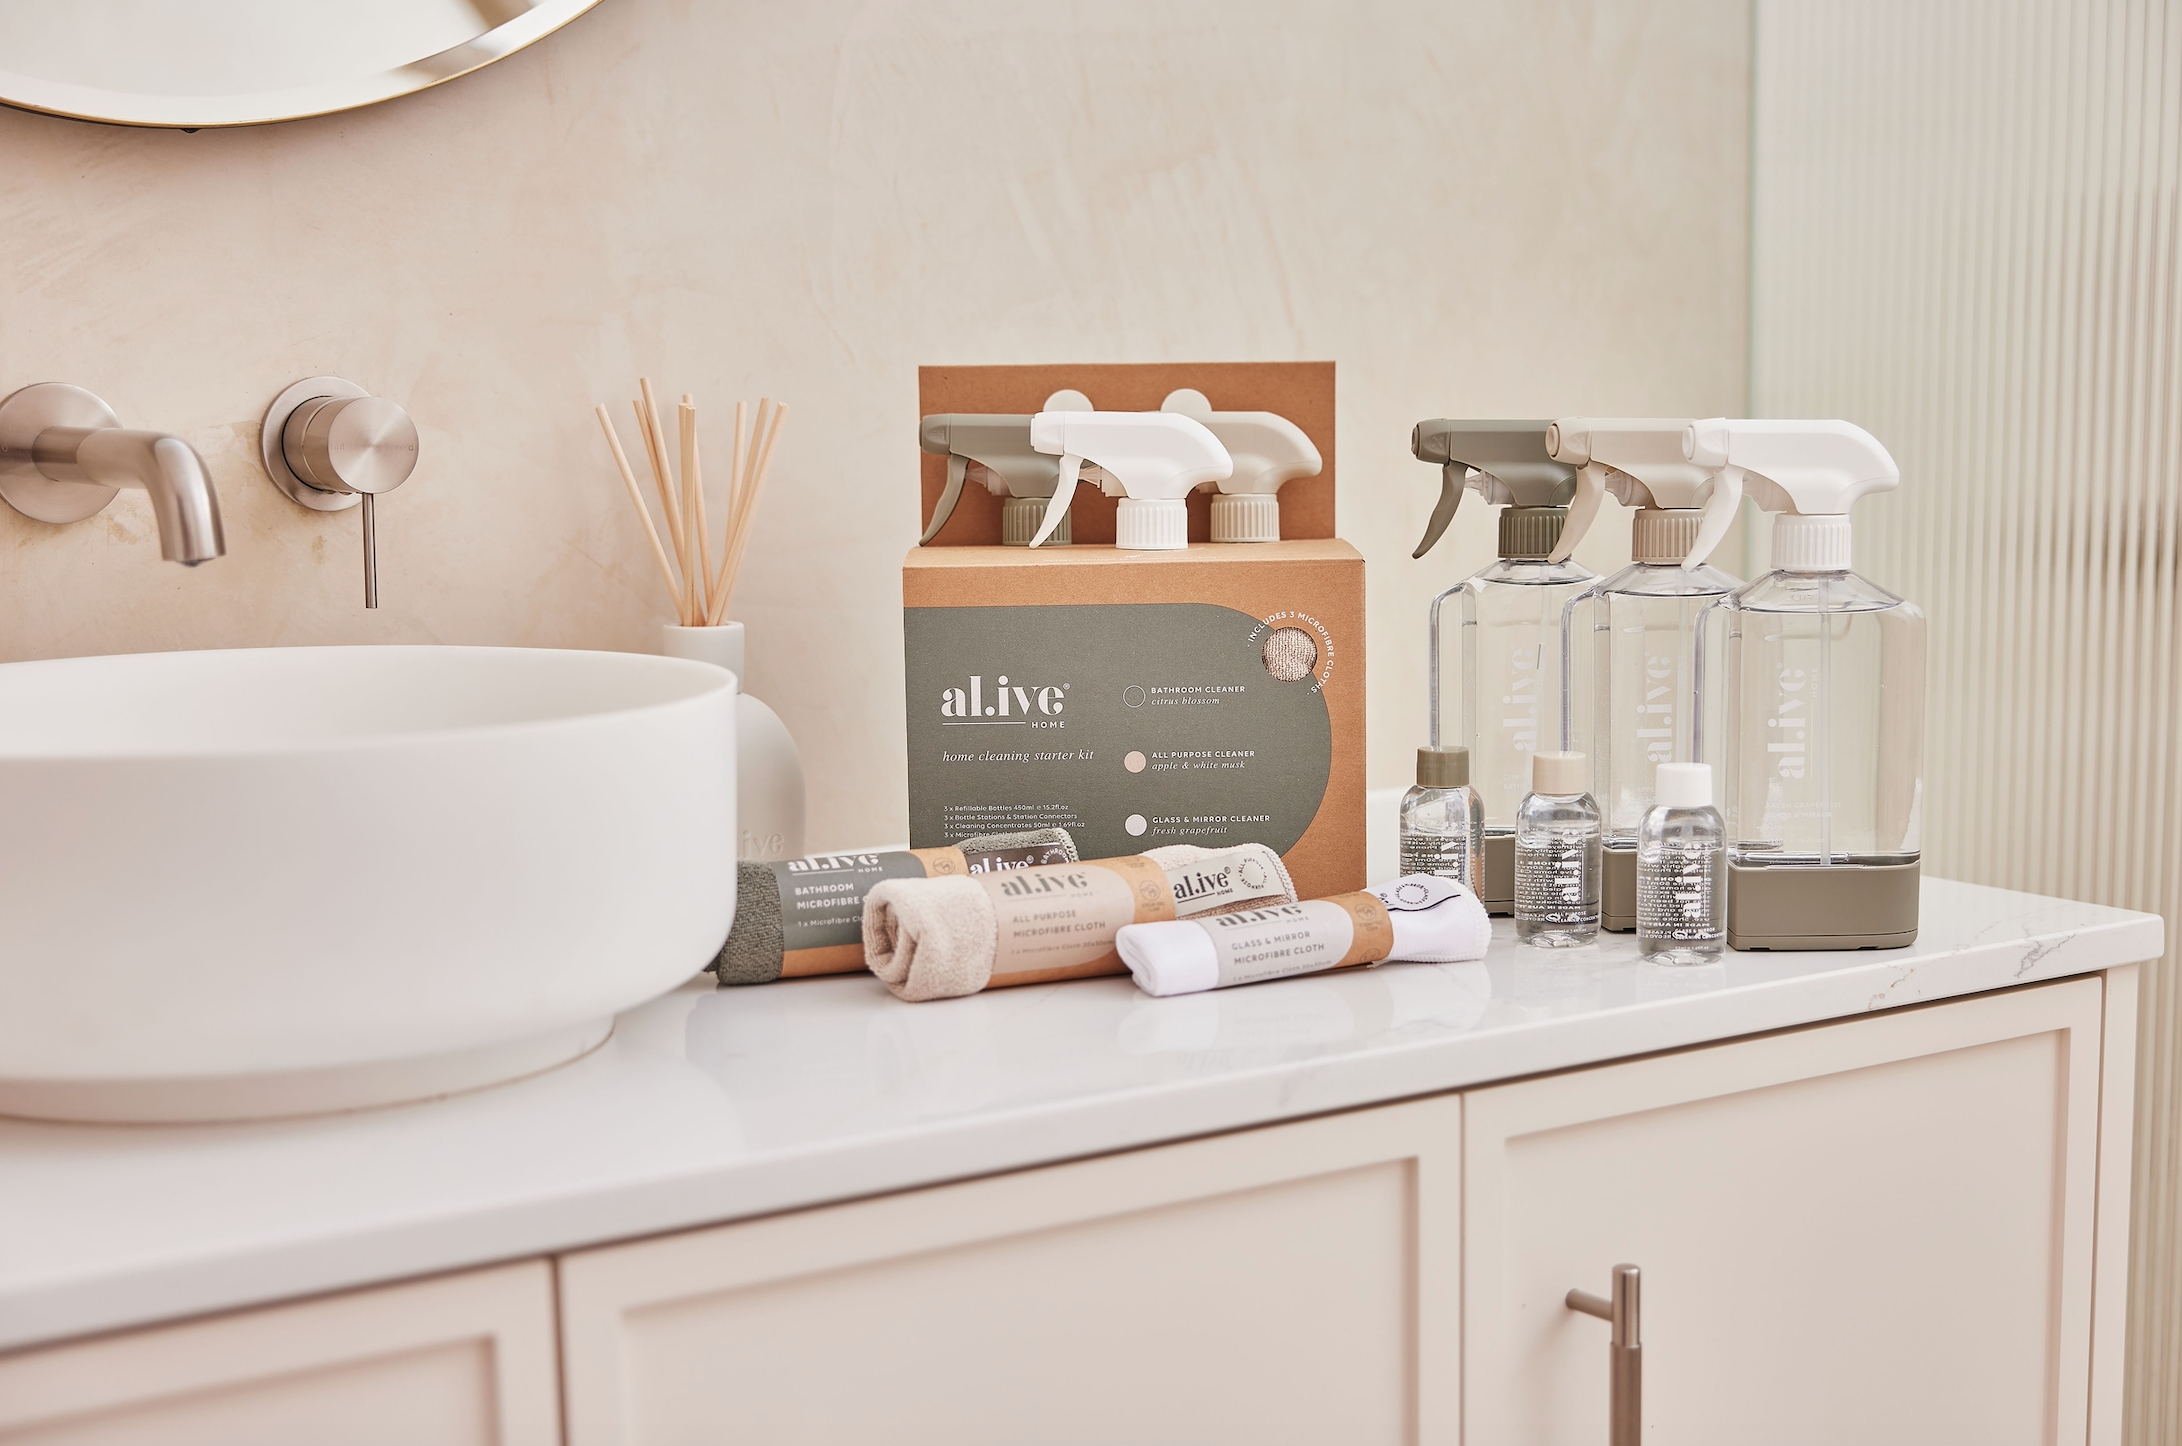 Say hello to the stylish and sustainable new home cleaning collection by al.ive body